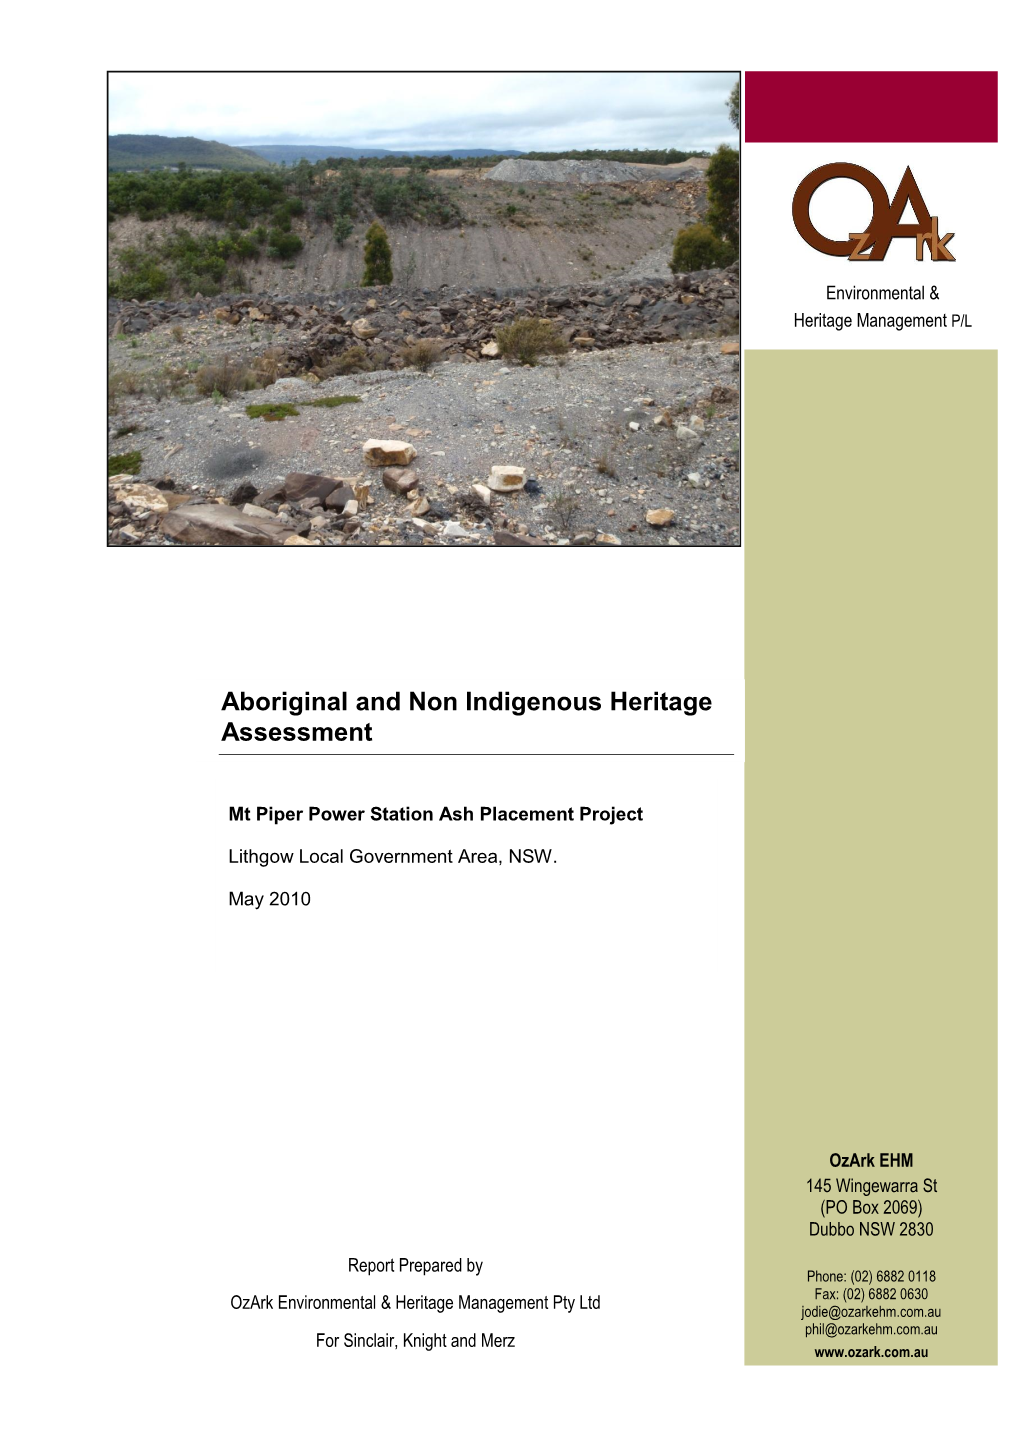 Aboriginal and Non Indigenous Heritage Assessment